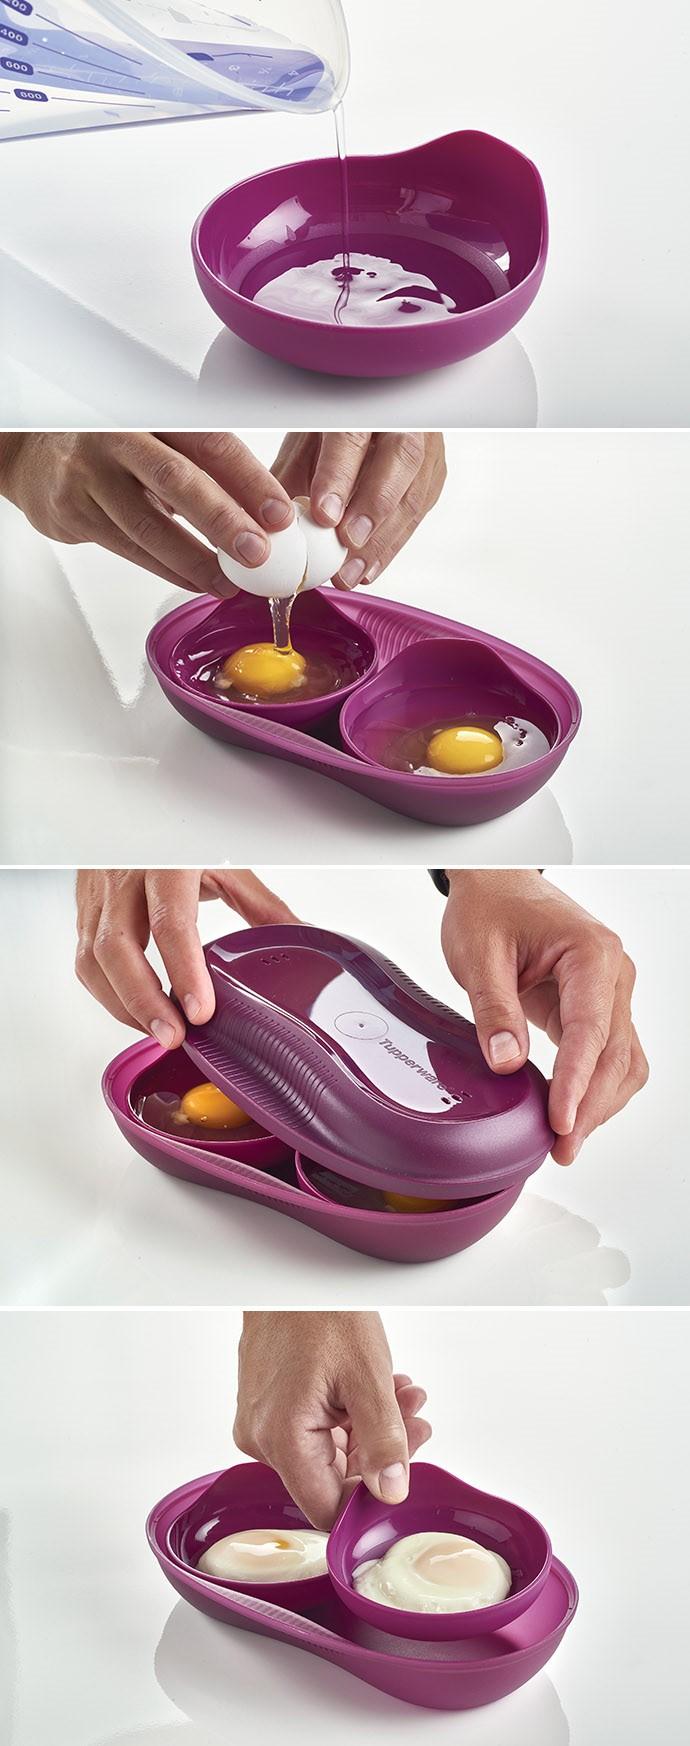 water into each Egg Insert; water fill line should be completely covered. 2. Place Egg Inserts into Microwave Breakfast Maker. 3.